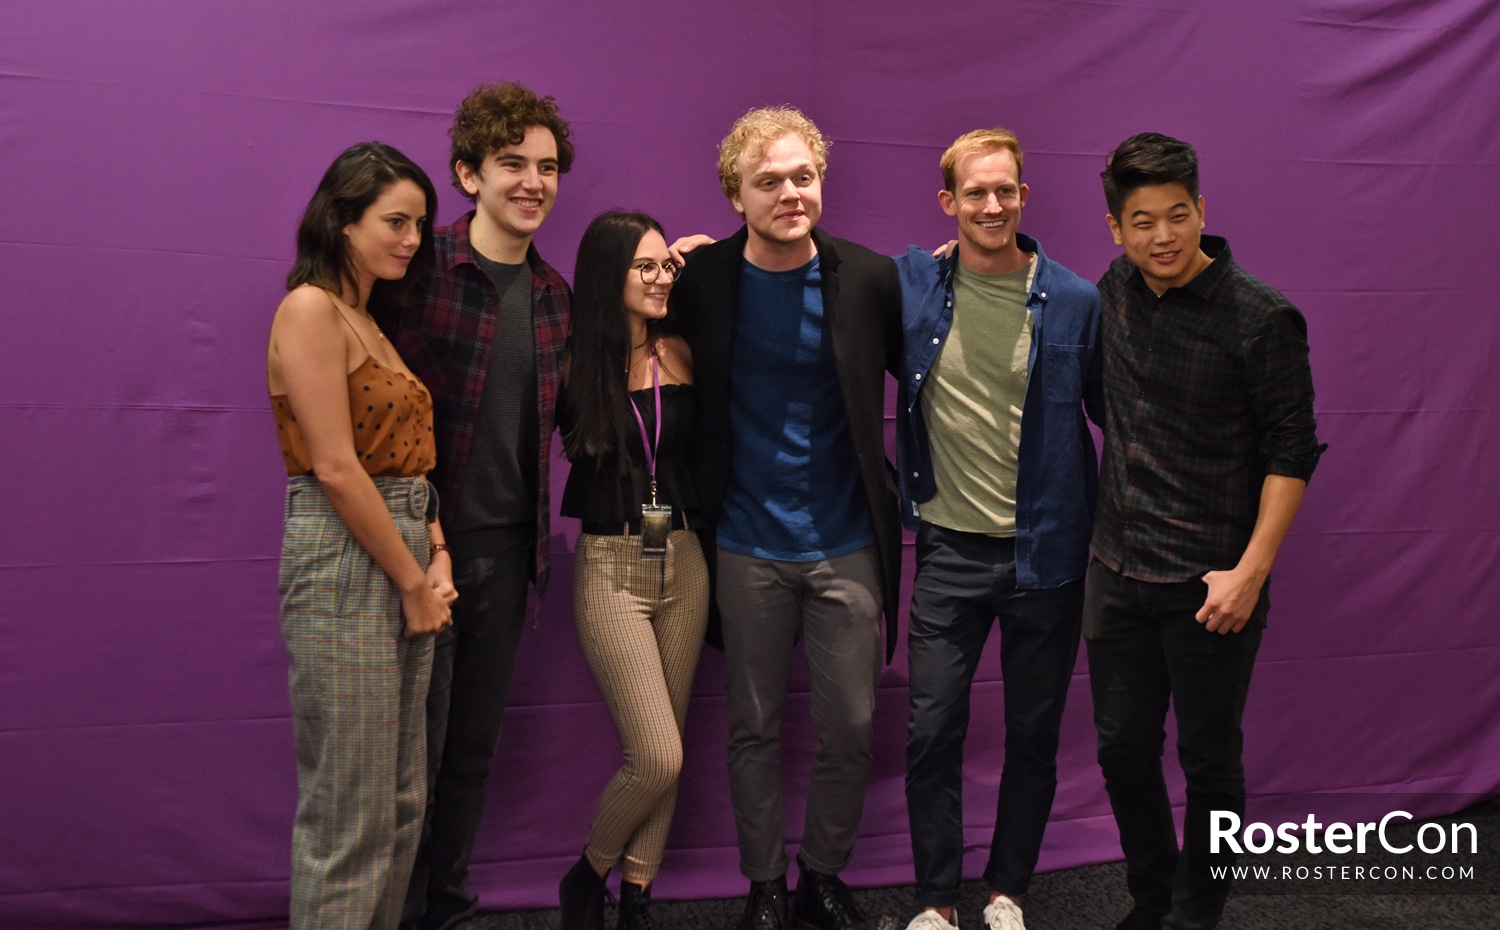 Group Photo - Wicked is Good - The Maze Runner